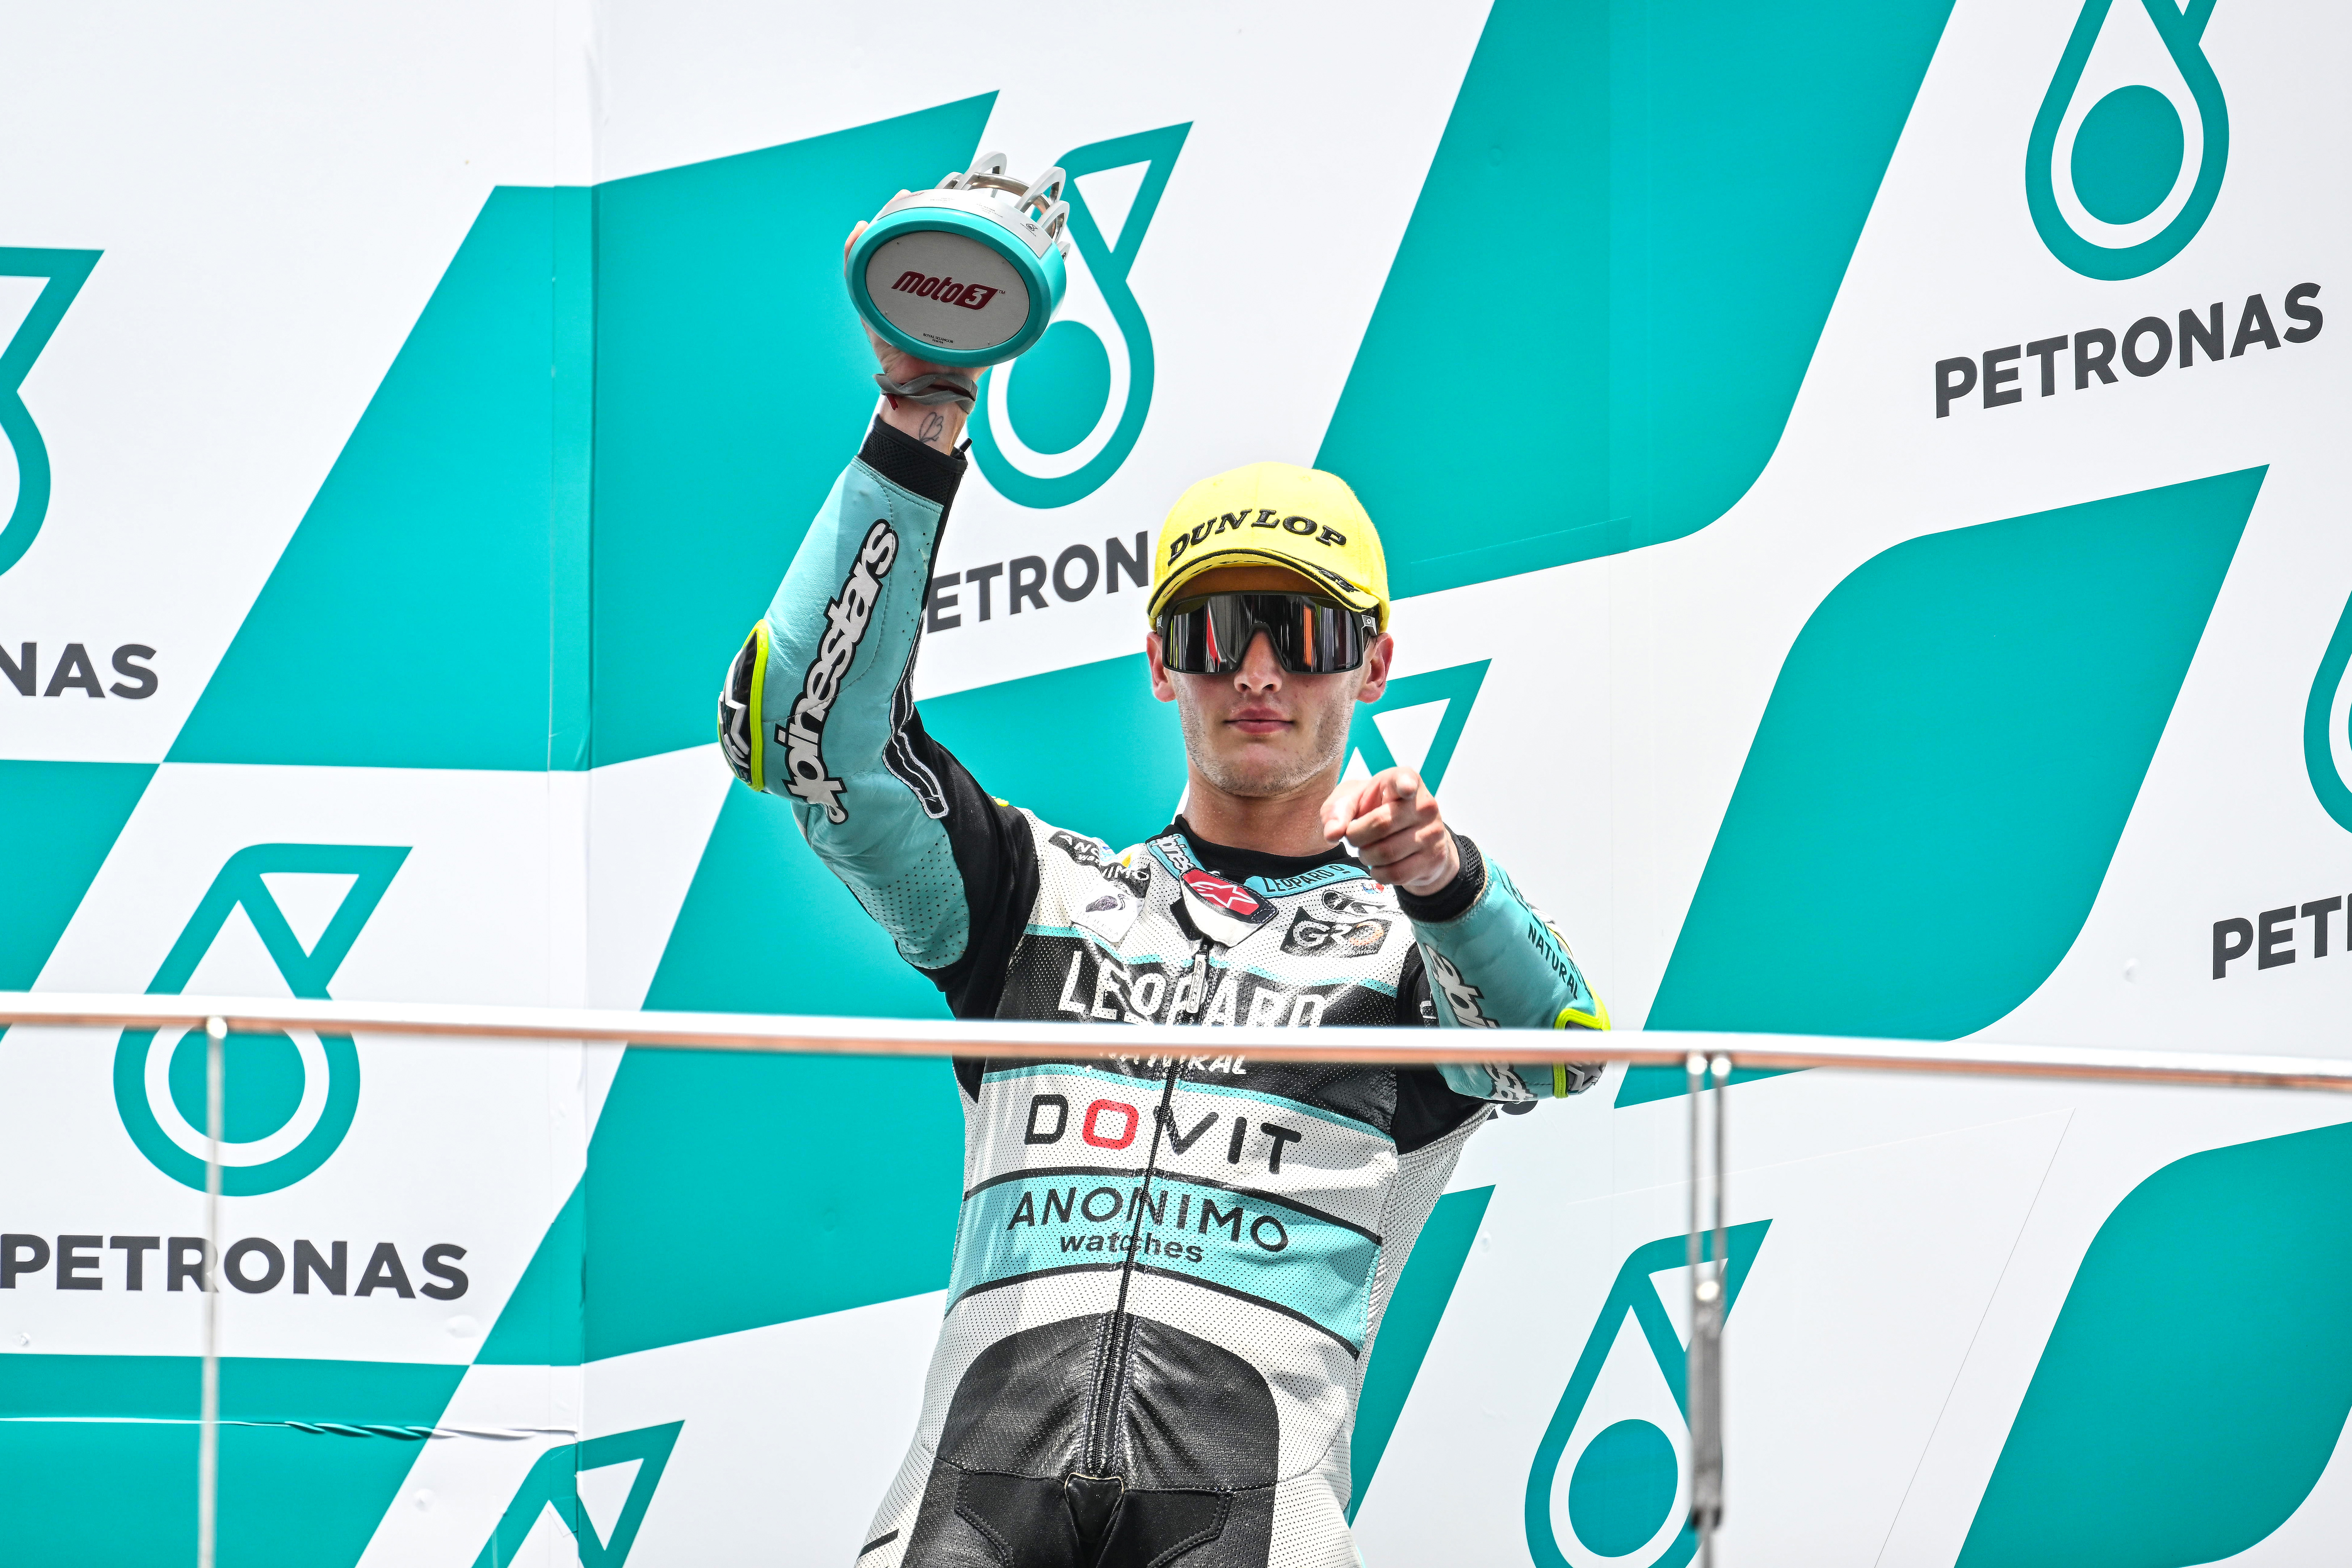 




Jaume Masià steps onto the podium in third position at Sepang


